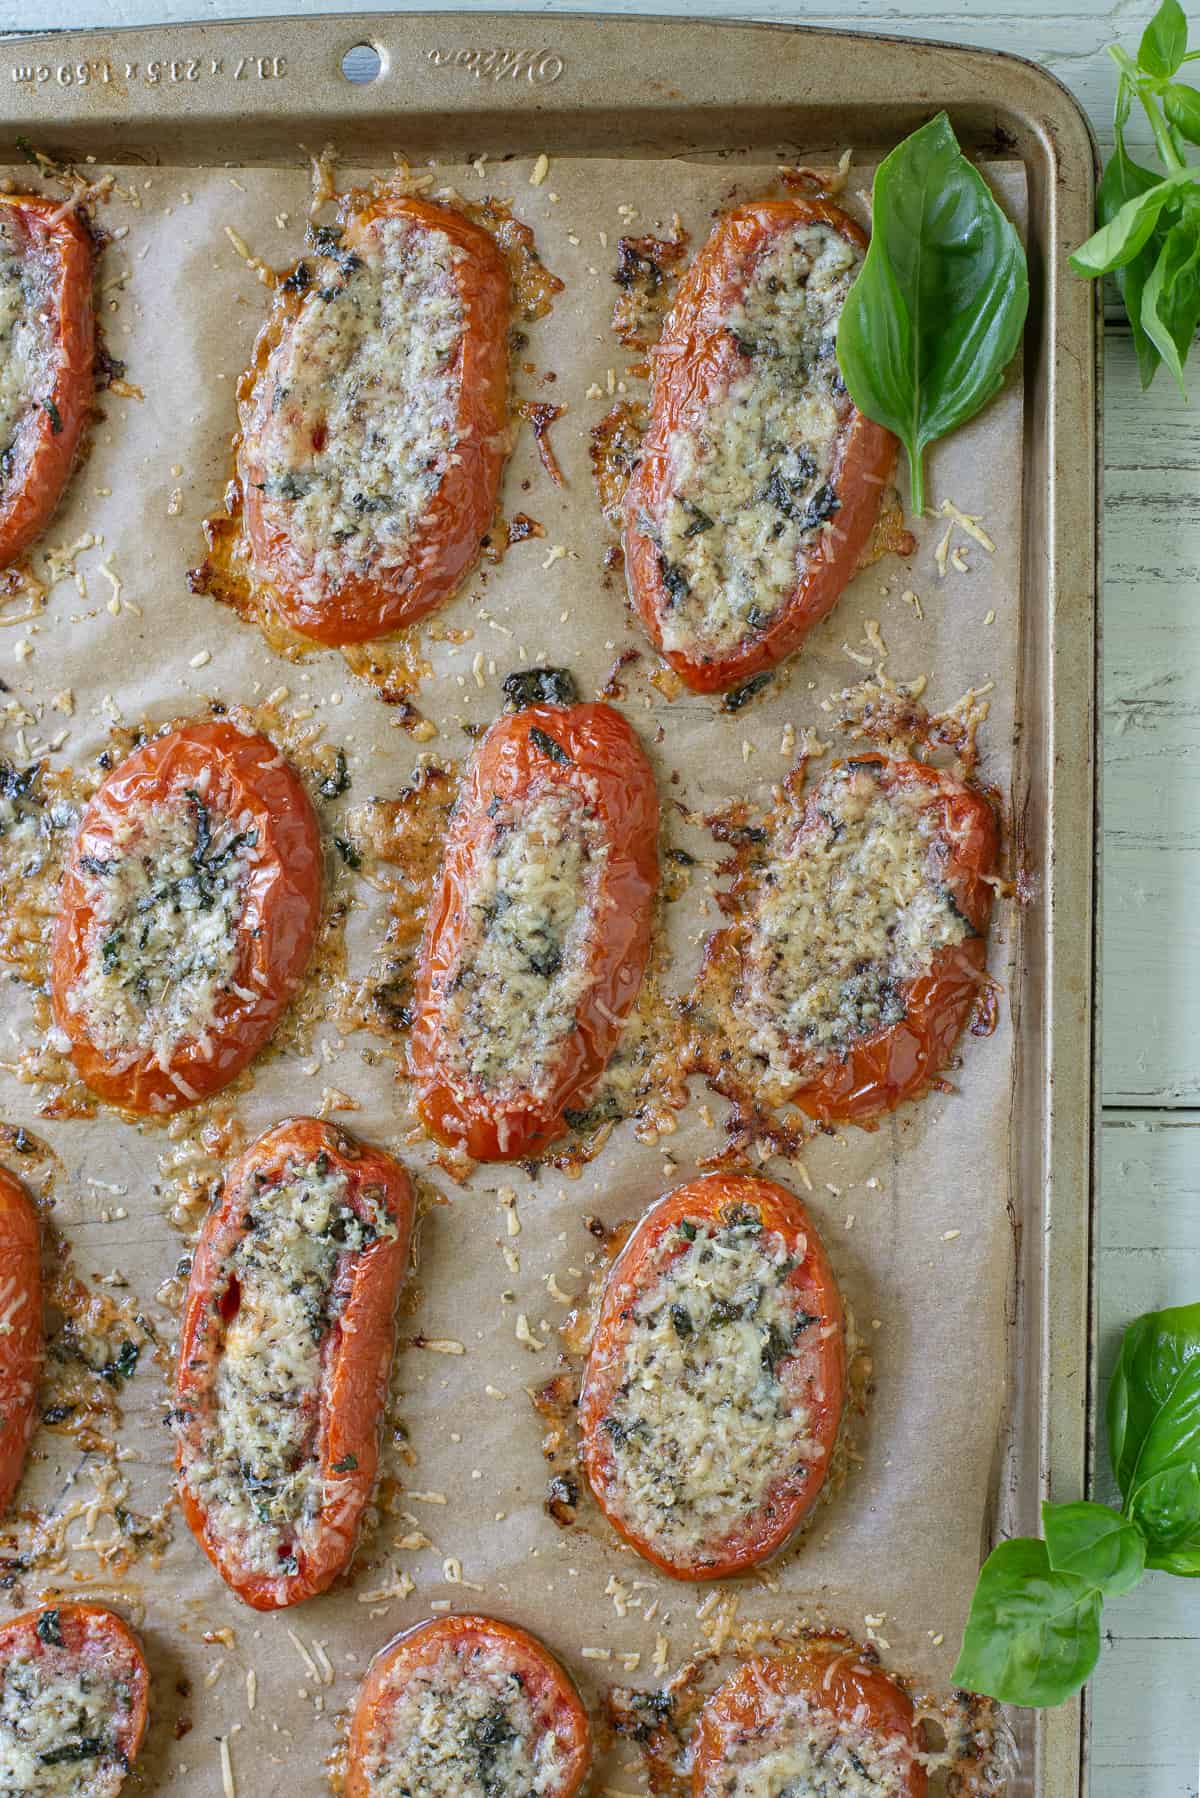 Baked tomato slices with parmesan on baking sheet with fresh basil